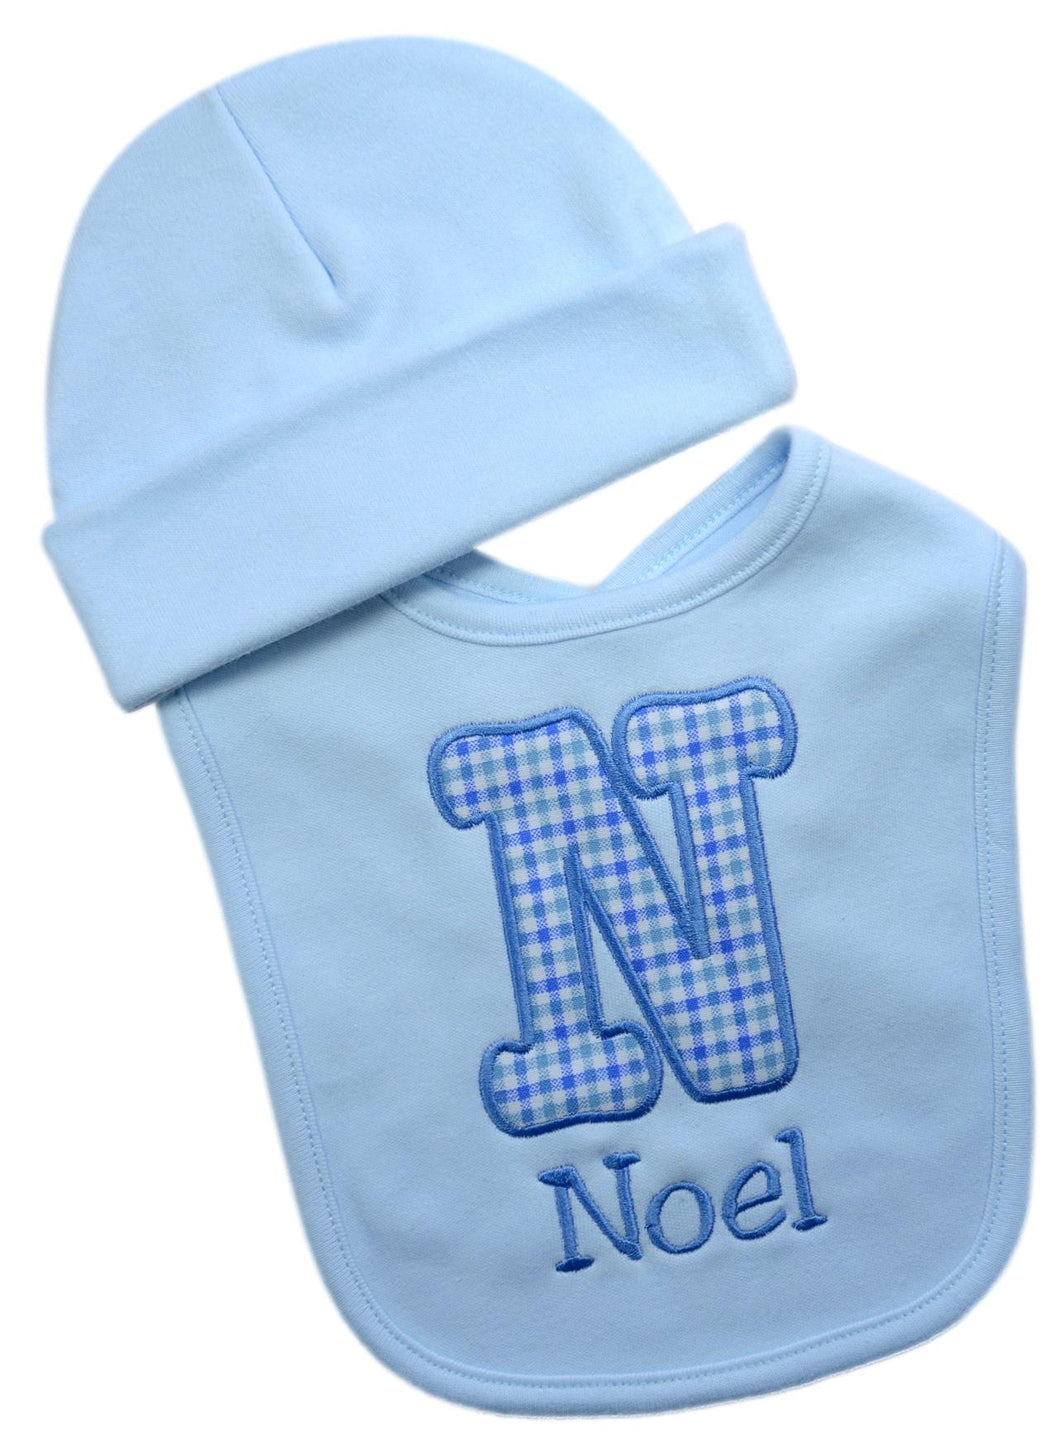 Personalized Initial Bib and Cotton Beanie Hat Gift Set